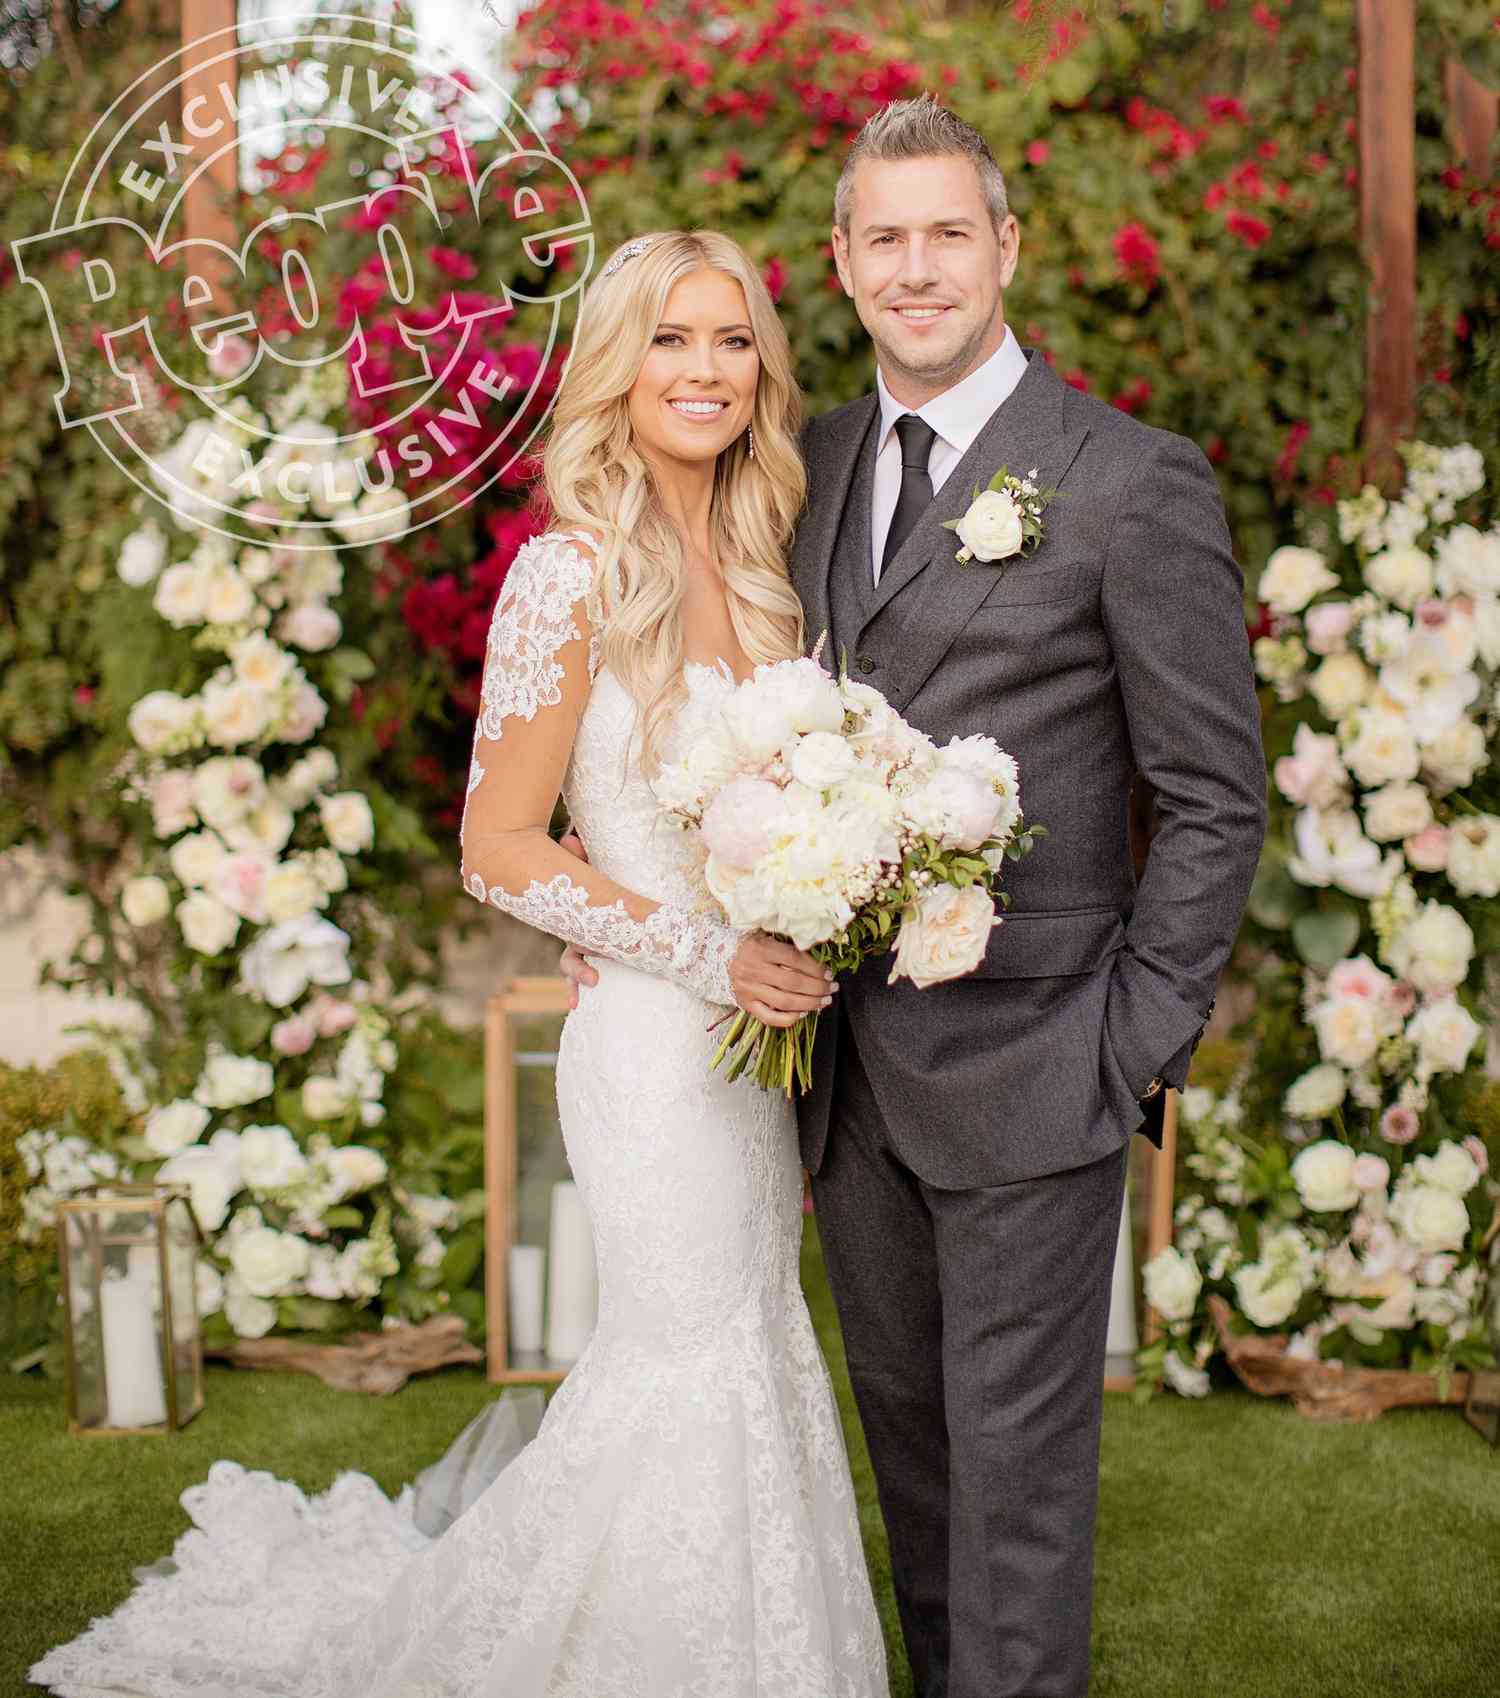 Christina El Moussa Marries Ant Anstead In Surprise Wedding People Com,What Do The Different Heart Colors Mean On Facebook